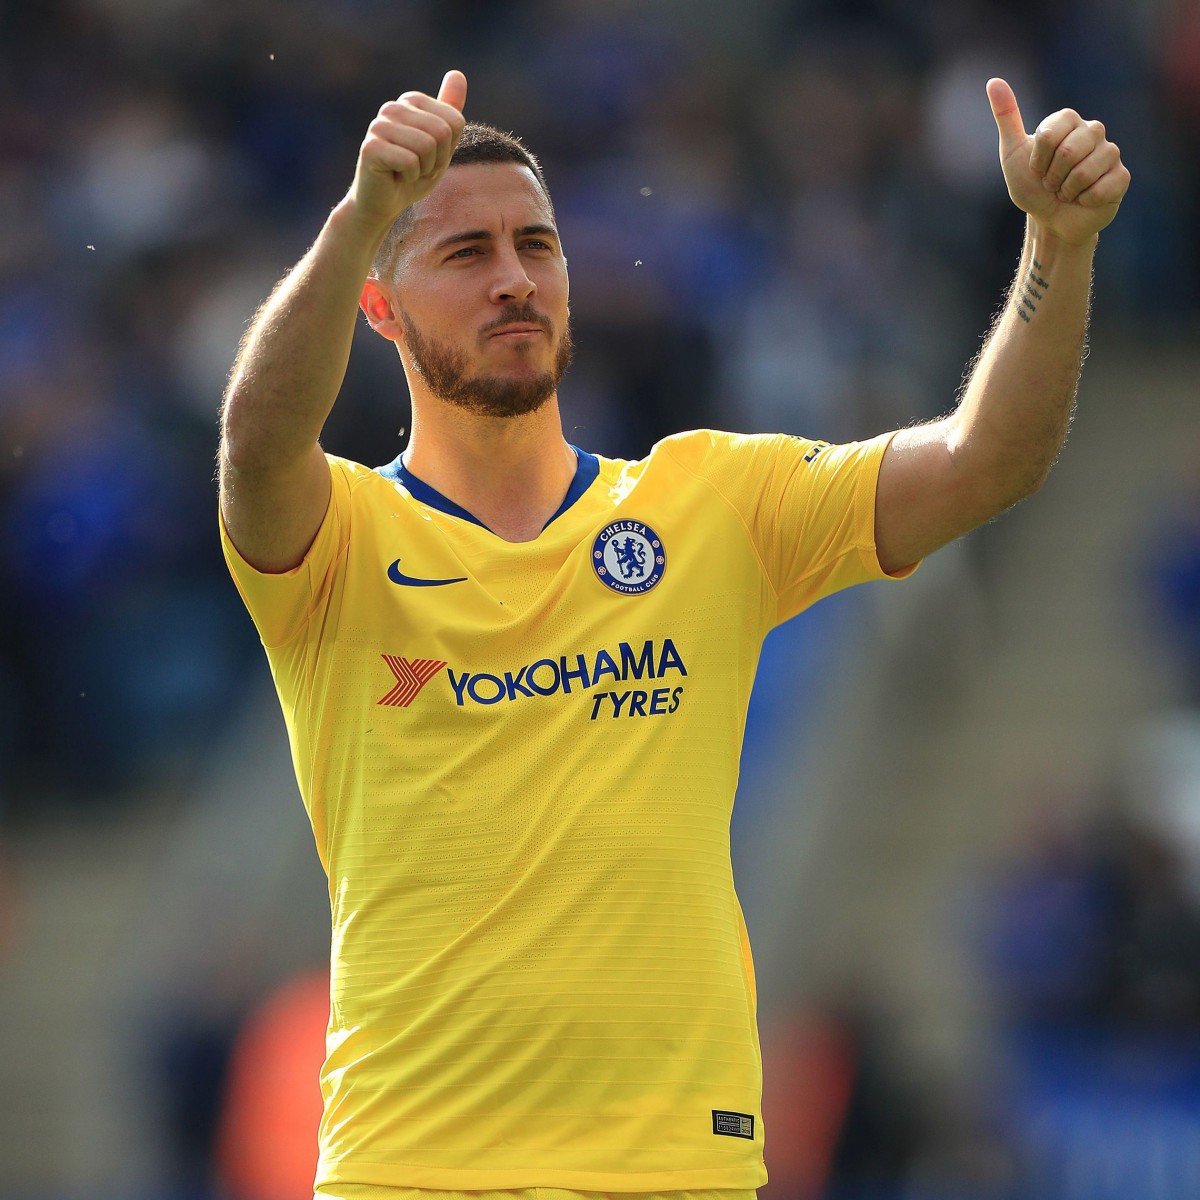 The Belgian winger has failed to replicate his goalscoring form from last season at Chelsea since moving to the Bernabeu, netting once this term